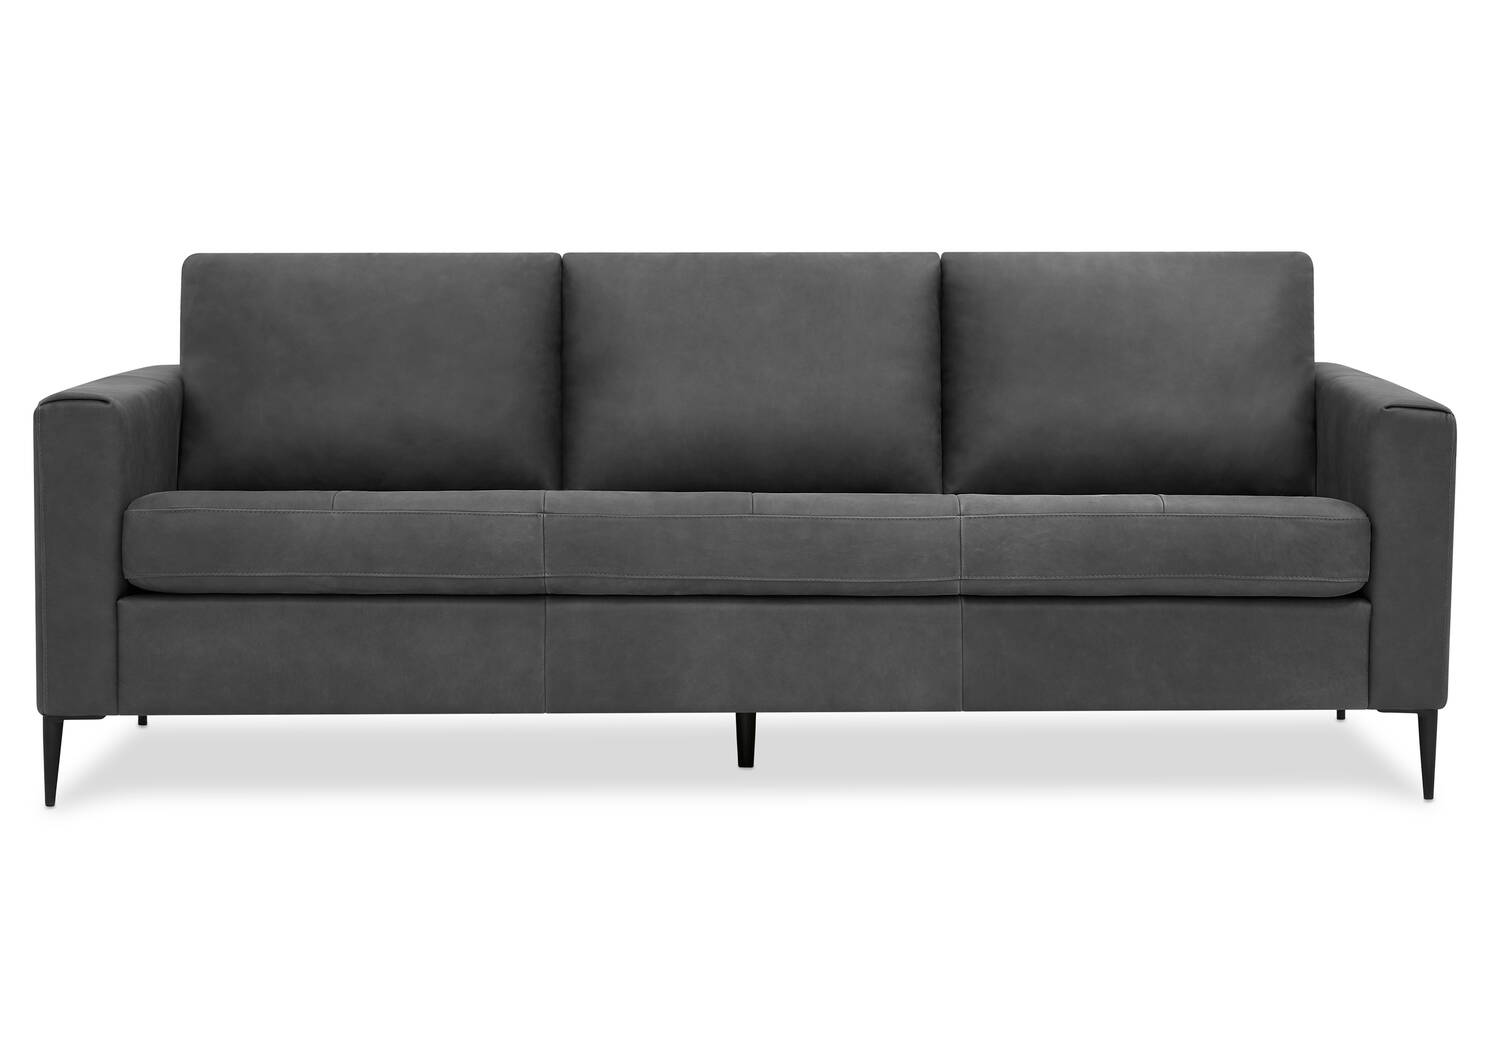 Lucca Leather Sofa